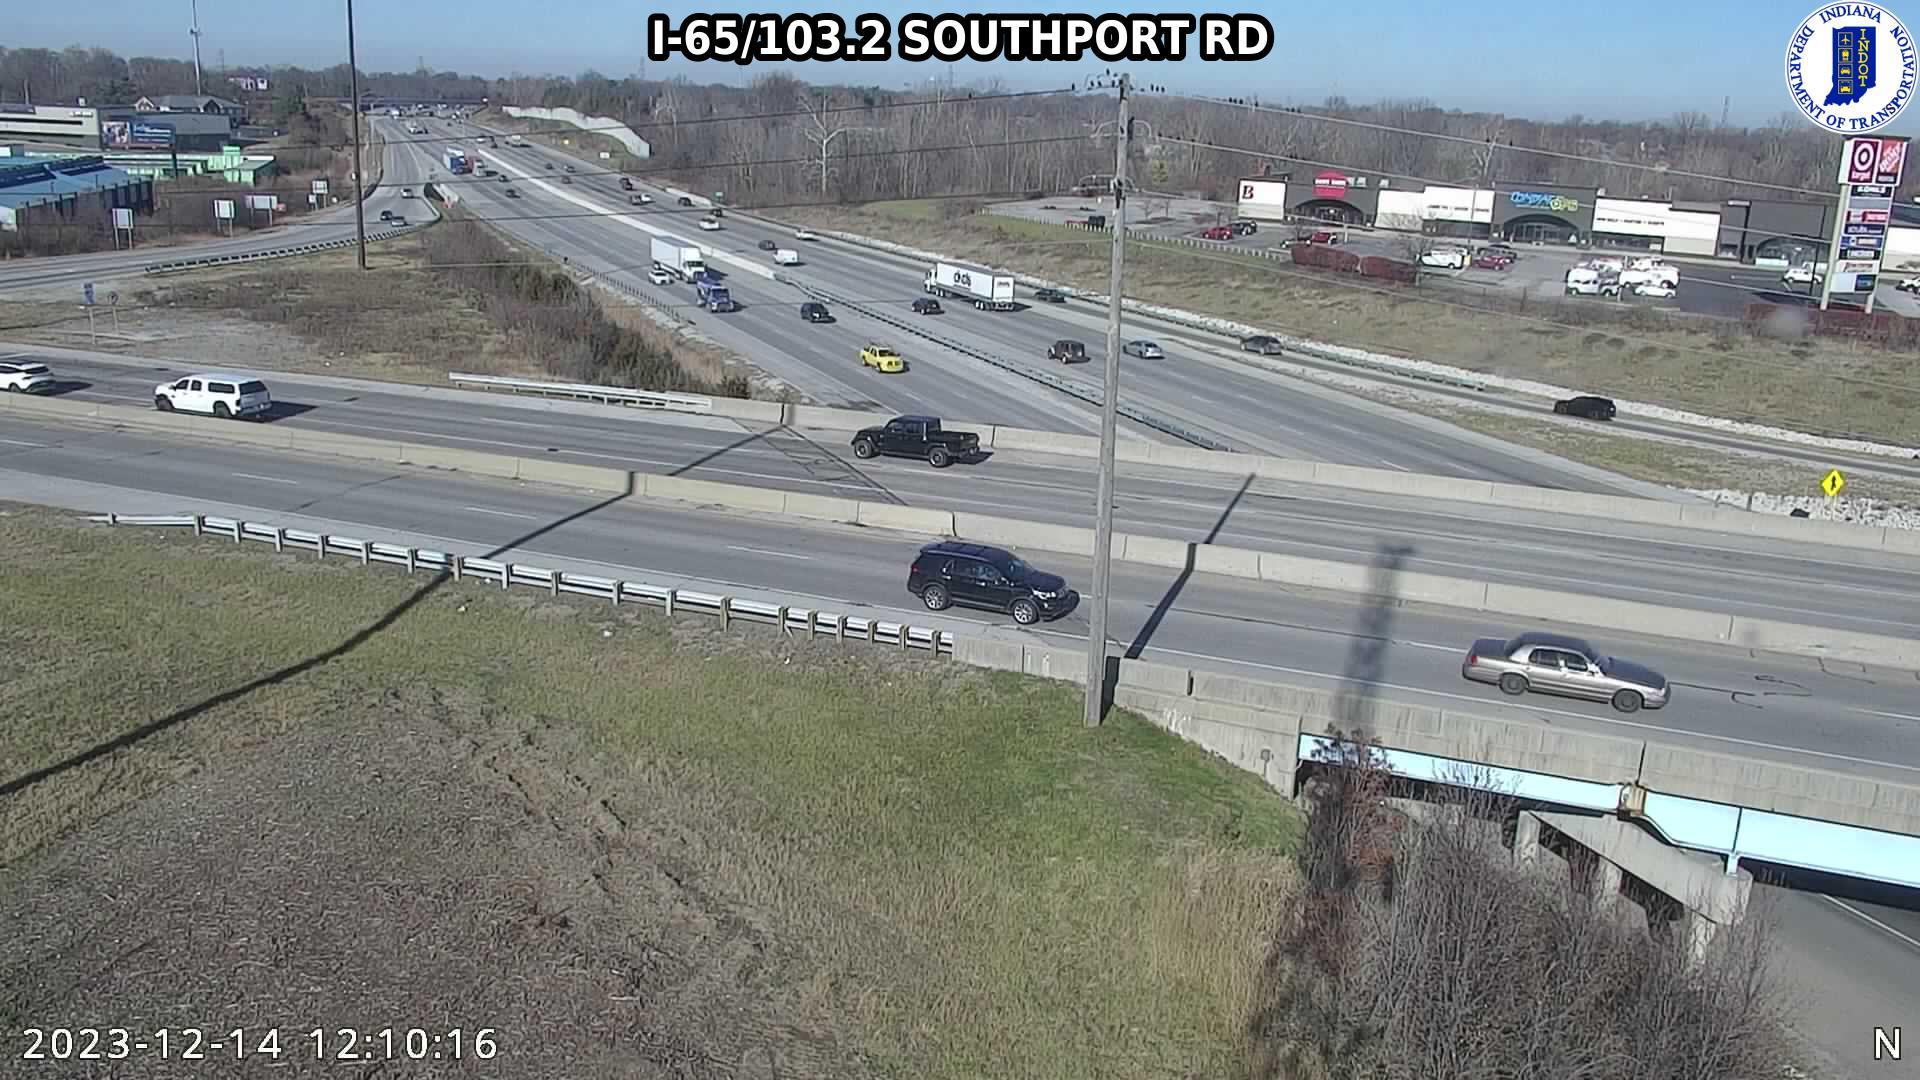 Traffic Cam Indianapolis: I-65: I-65/103.2 SOUTHPORT RD Player